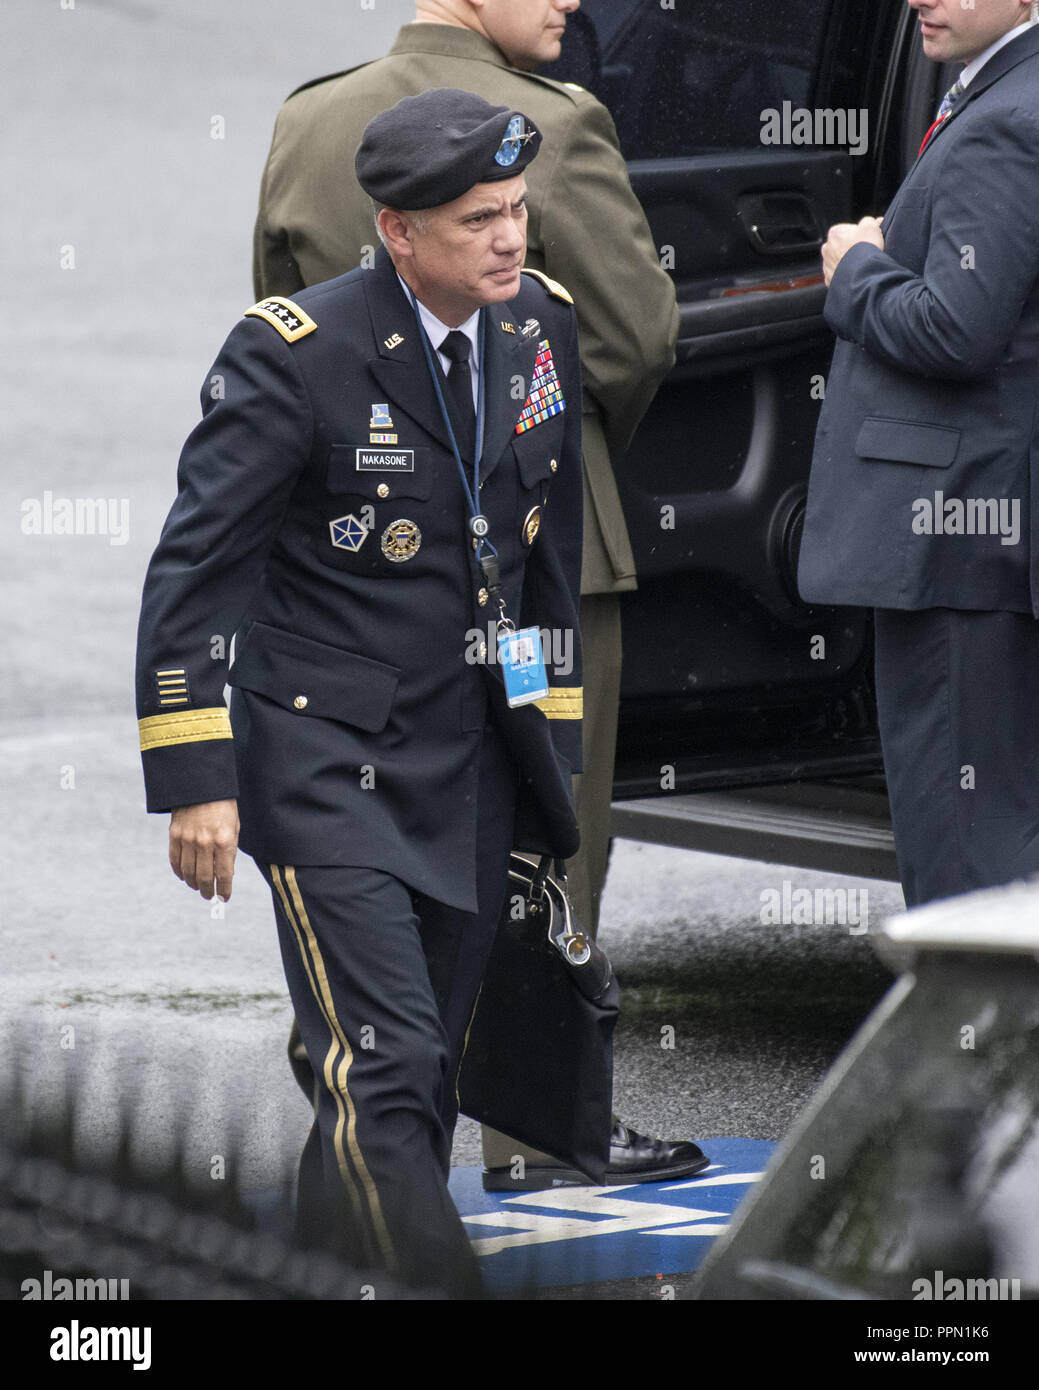 Washington, District of Columbia, USA. 24th Sep, 2018. United States Army General Paul M. Nakasone, Commander, U.S. Cyber Command and Director, National Security Agency/Chief, Central Security Service, departs a meeting at the White House in Washington, DC that included US Deputy Attorney General Rod Rosenstein on Monday, September 24, 2018 Credit: Ron Sachs/CNP/ZUMA Wire/Alamy Live News Stock Photo